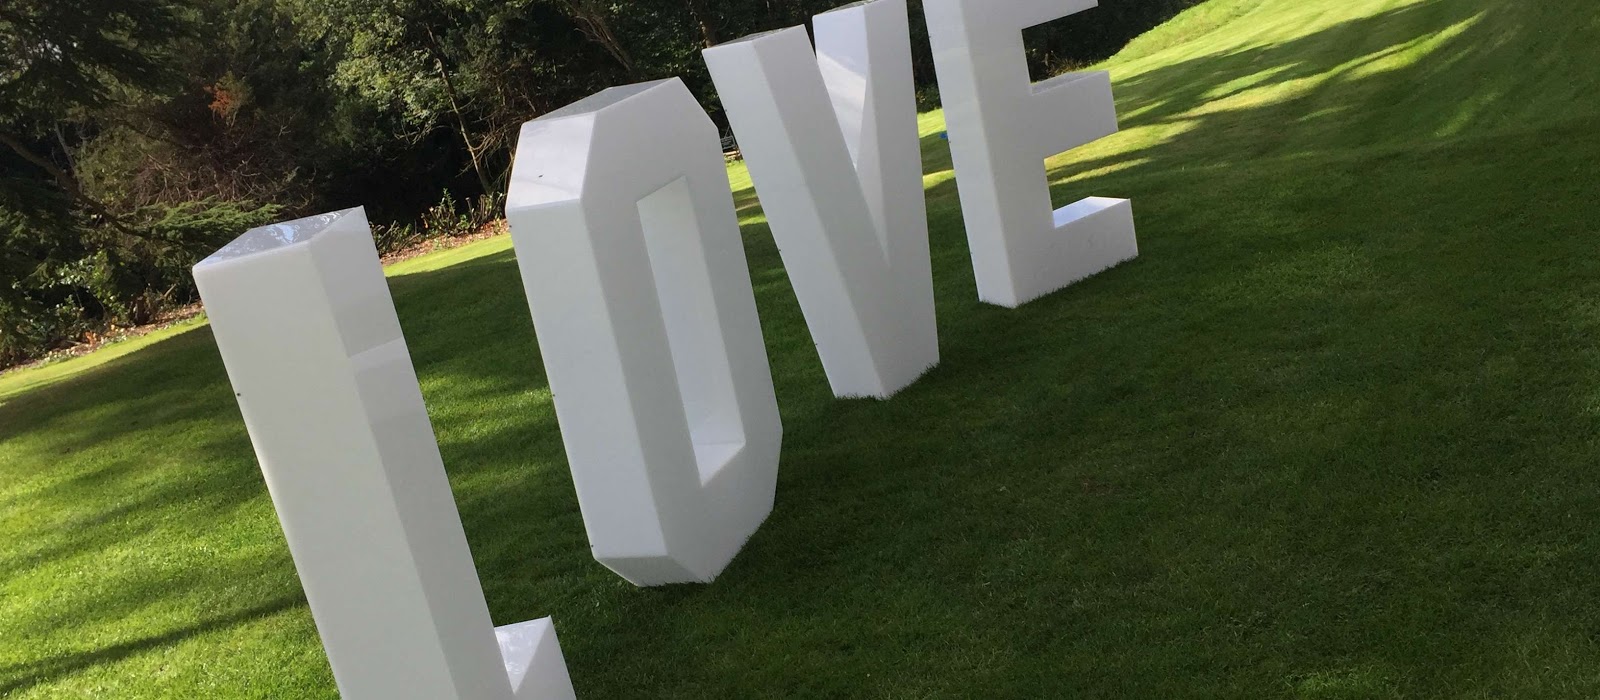 LED Letters are neat grass that say love